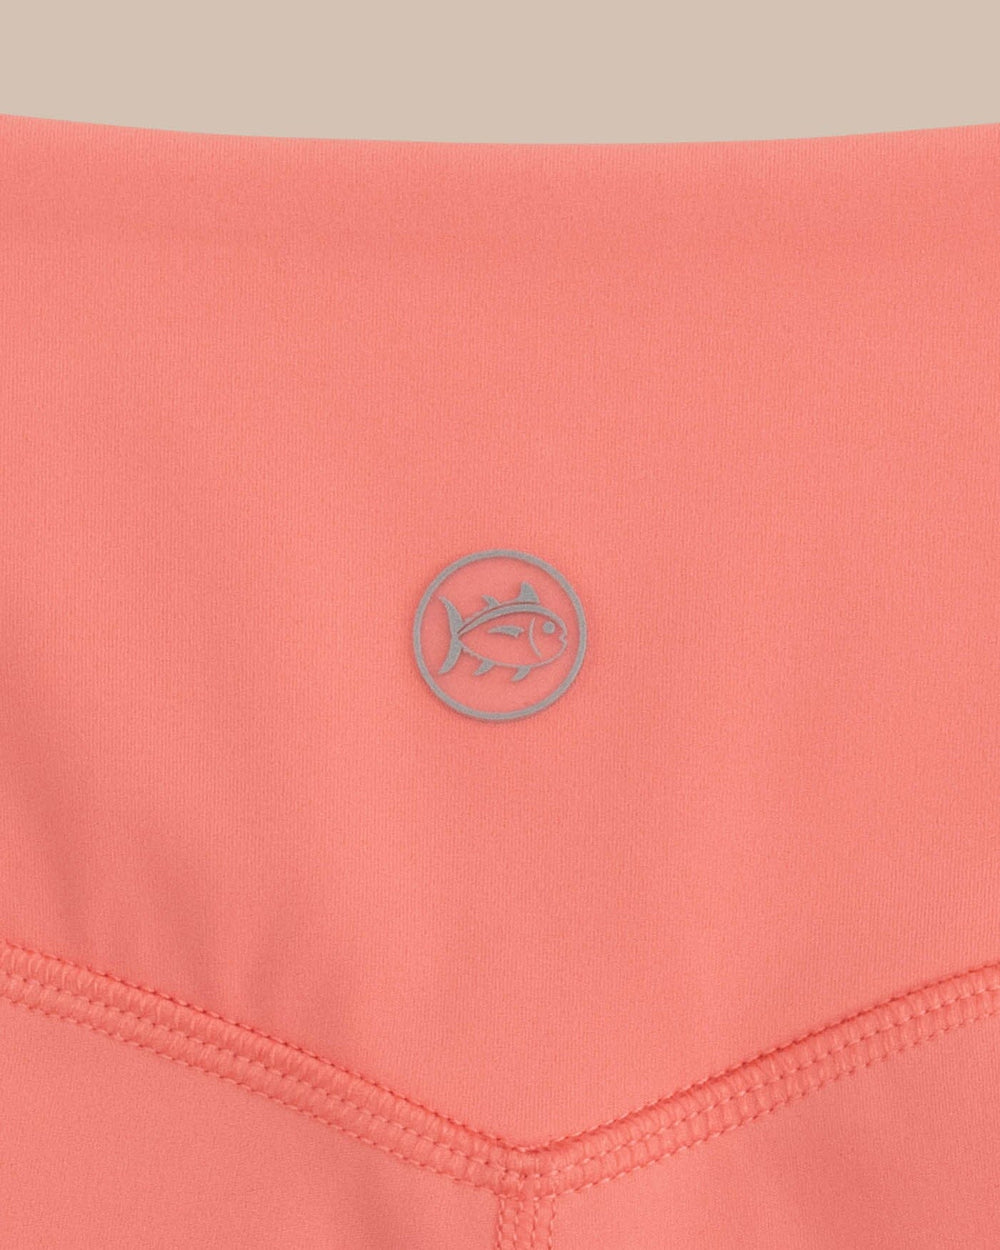 The detail view of the Southern Tide Active Under Short by Southern Tide - Conch Shell